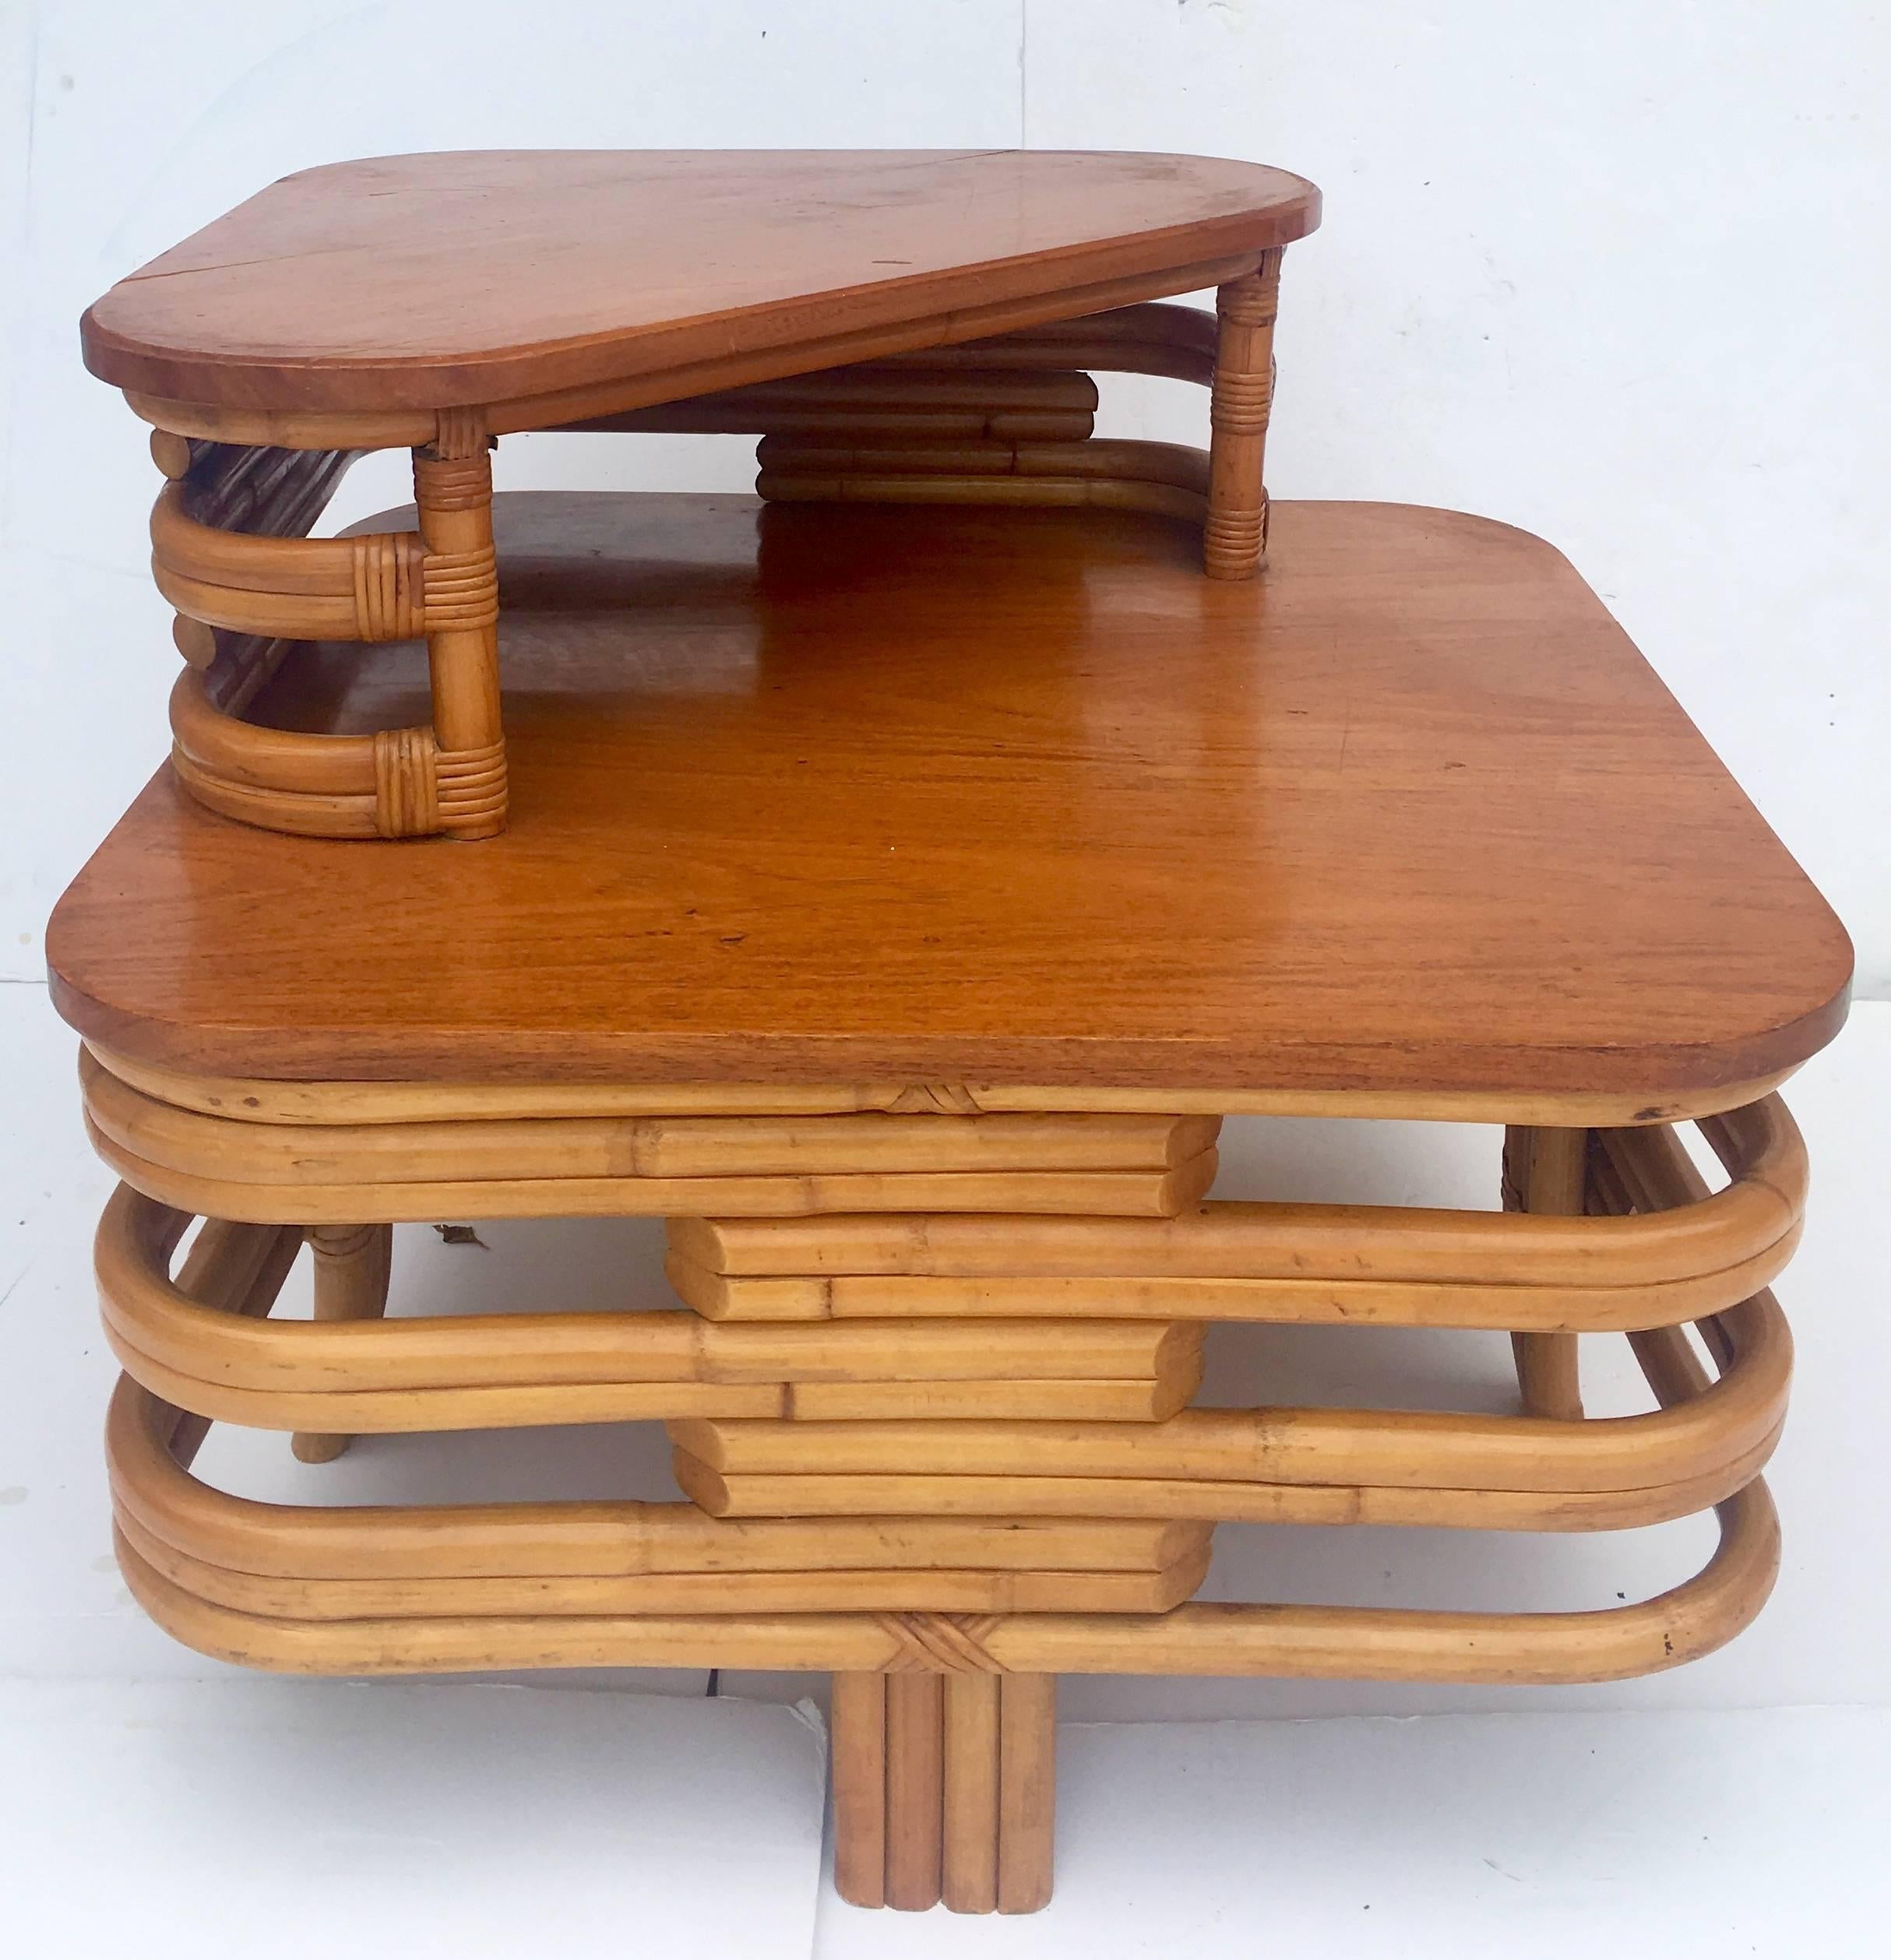 Art Deco Paul Frankl design RARE bent leg, rattan reed stack two-tier mahogany top table. This Art Deco slanted leg side or coffee table features mahogany stained tops and an open stacked reed design.
Dimensions:
Lower tier is 16